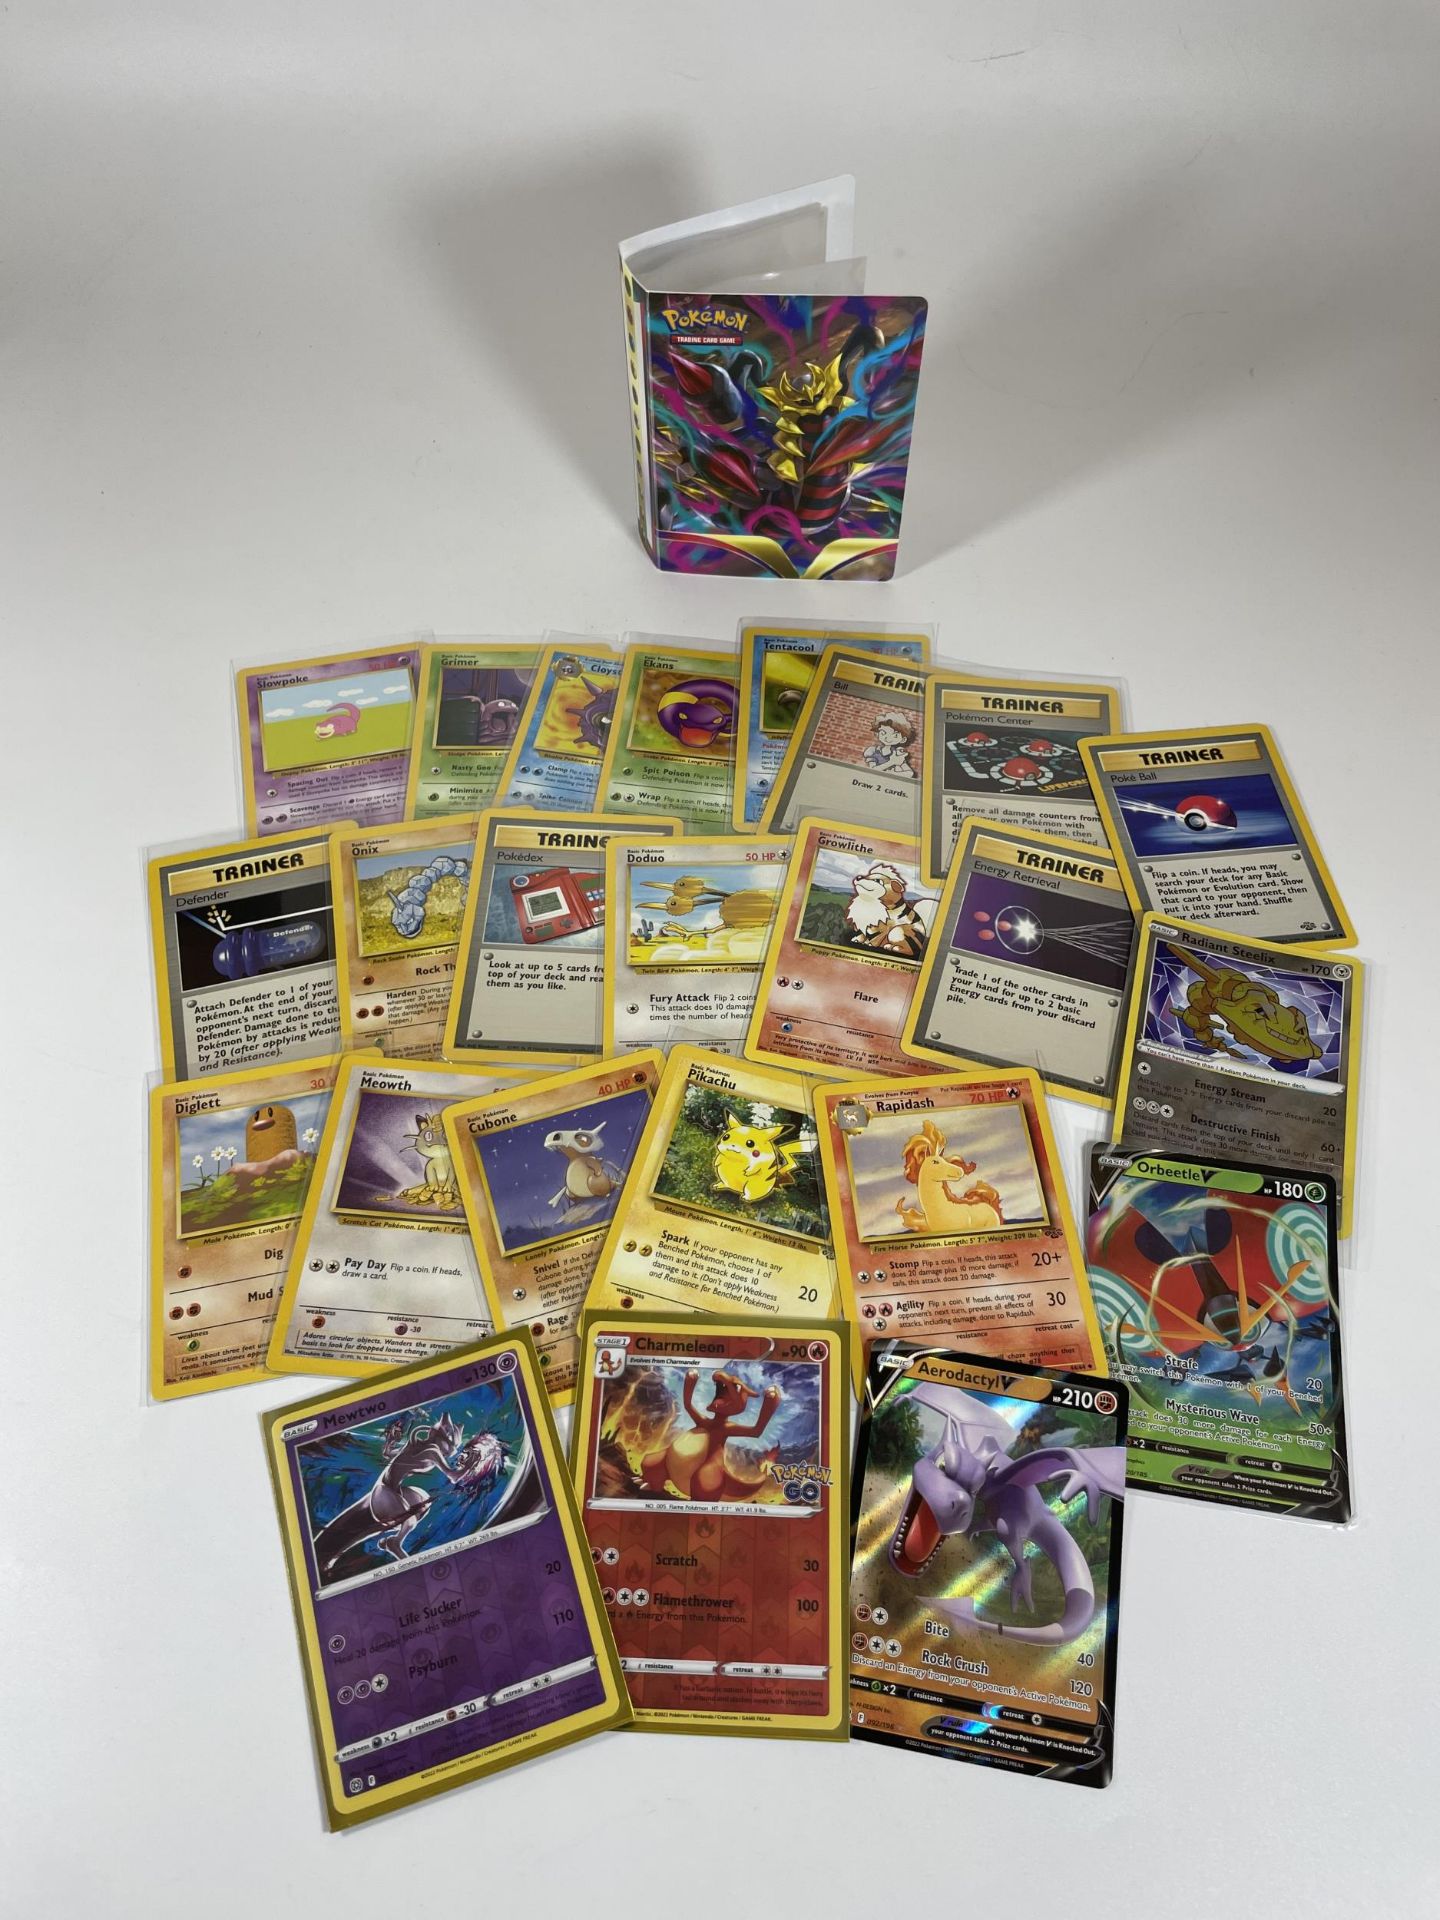 A SMALL POKEMON FOLDER OF CARDS - JUNGLE SET 1999 PIKACHU, FURTHER WOTC CARDS, MEWTWO RADIANT - Image 2 of 5